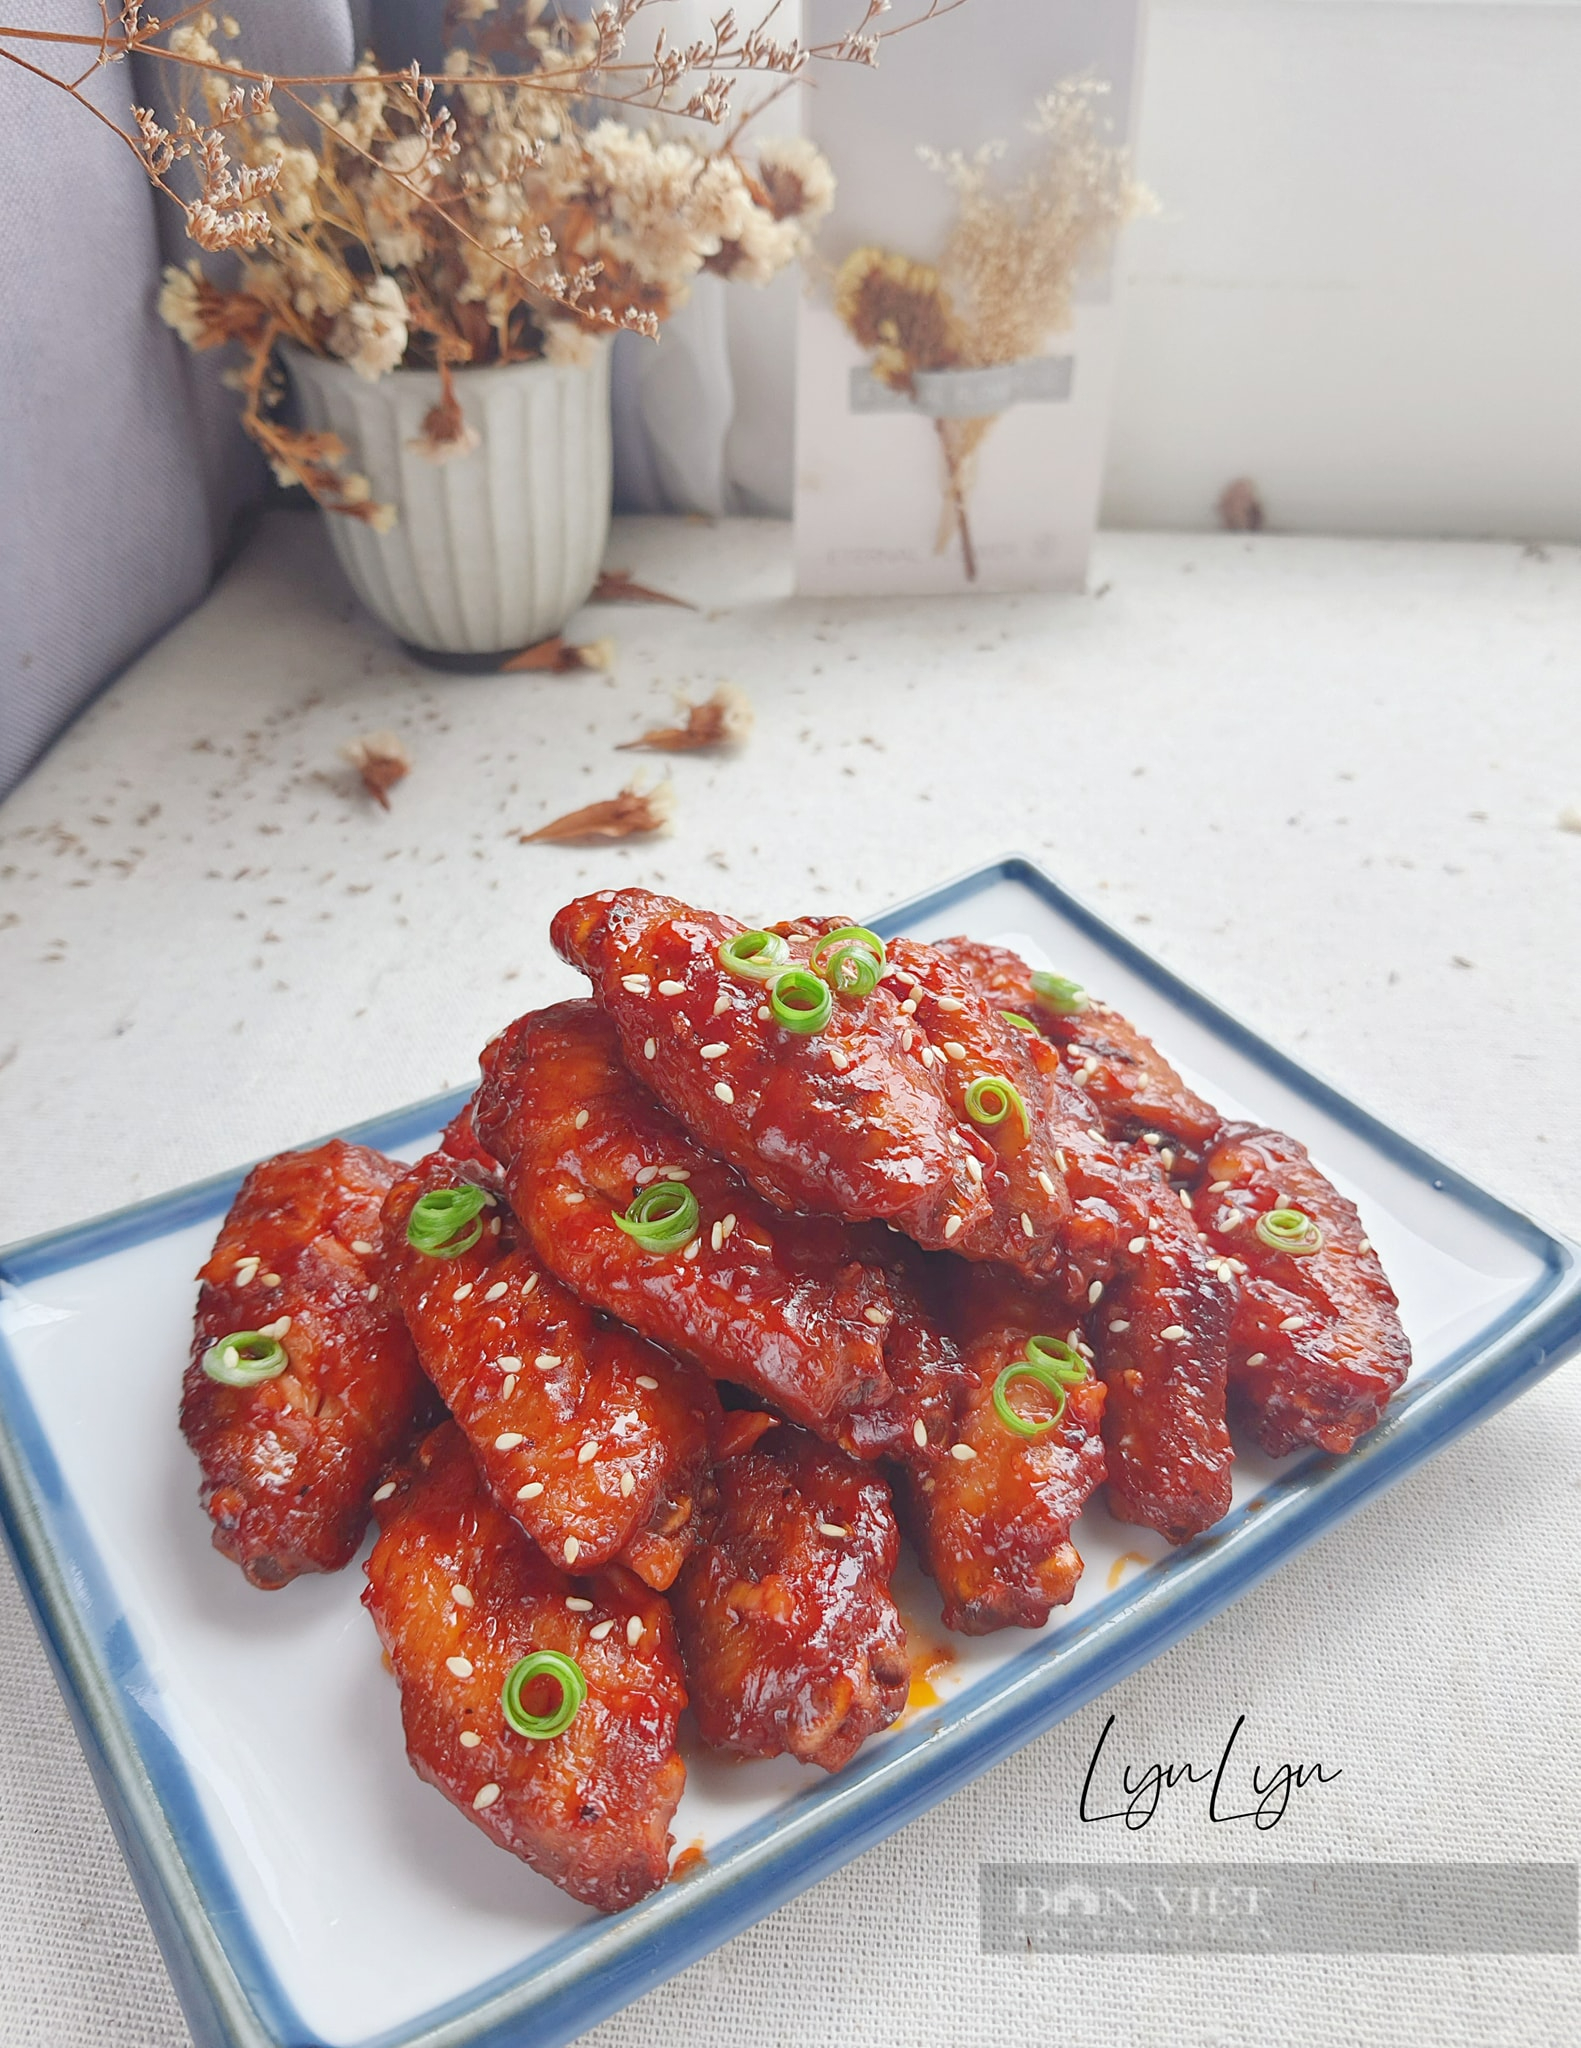 Chicken wings marinated with this sauce, guaranteed to be beautiful and delicious - Photo 1.